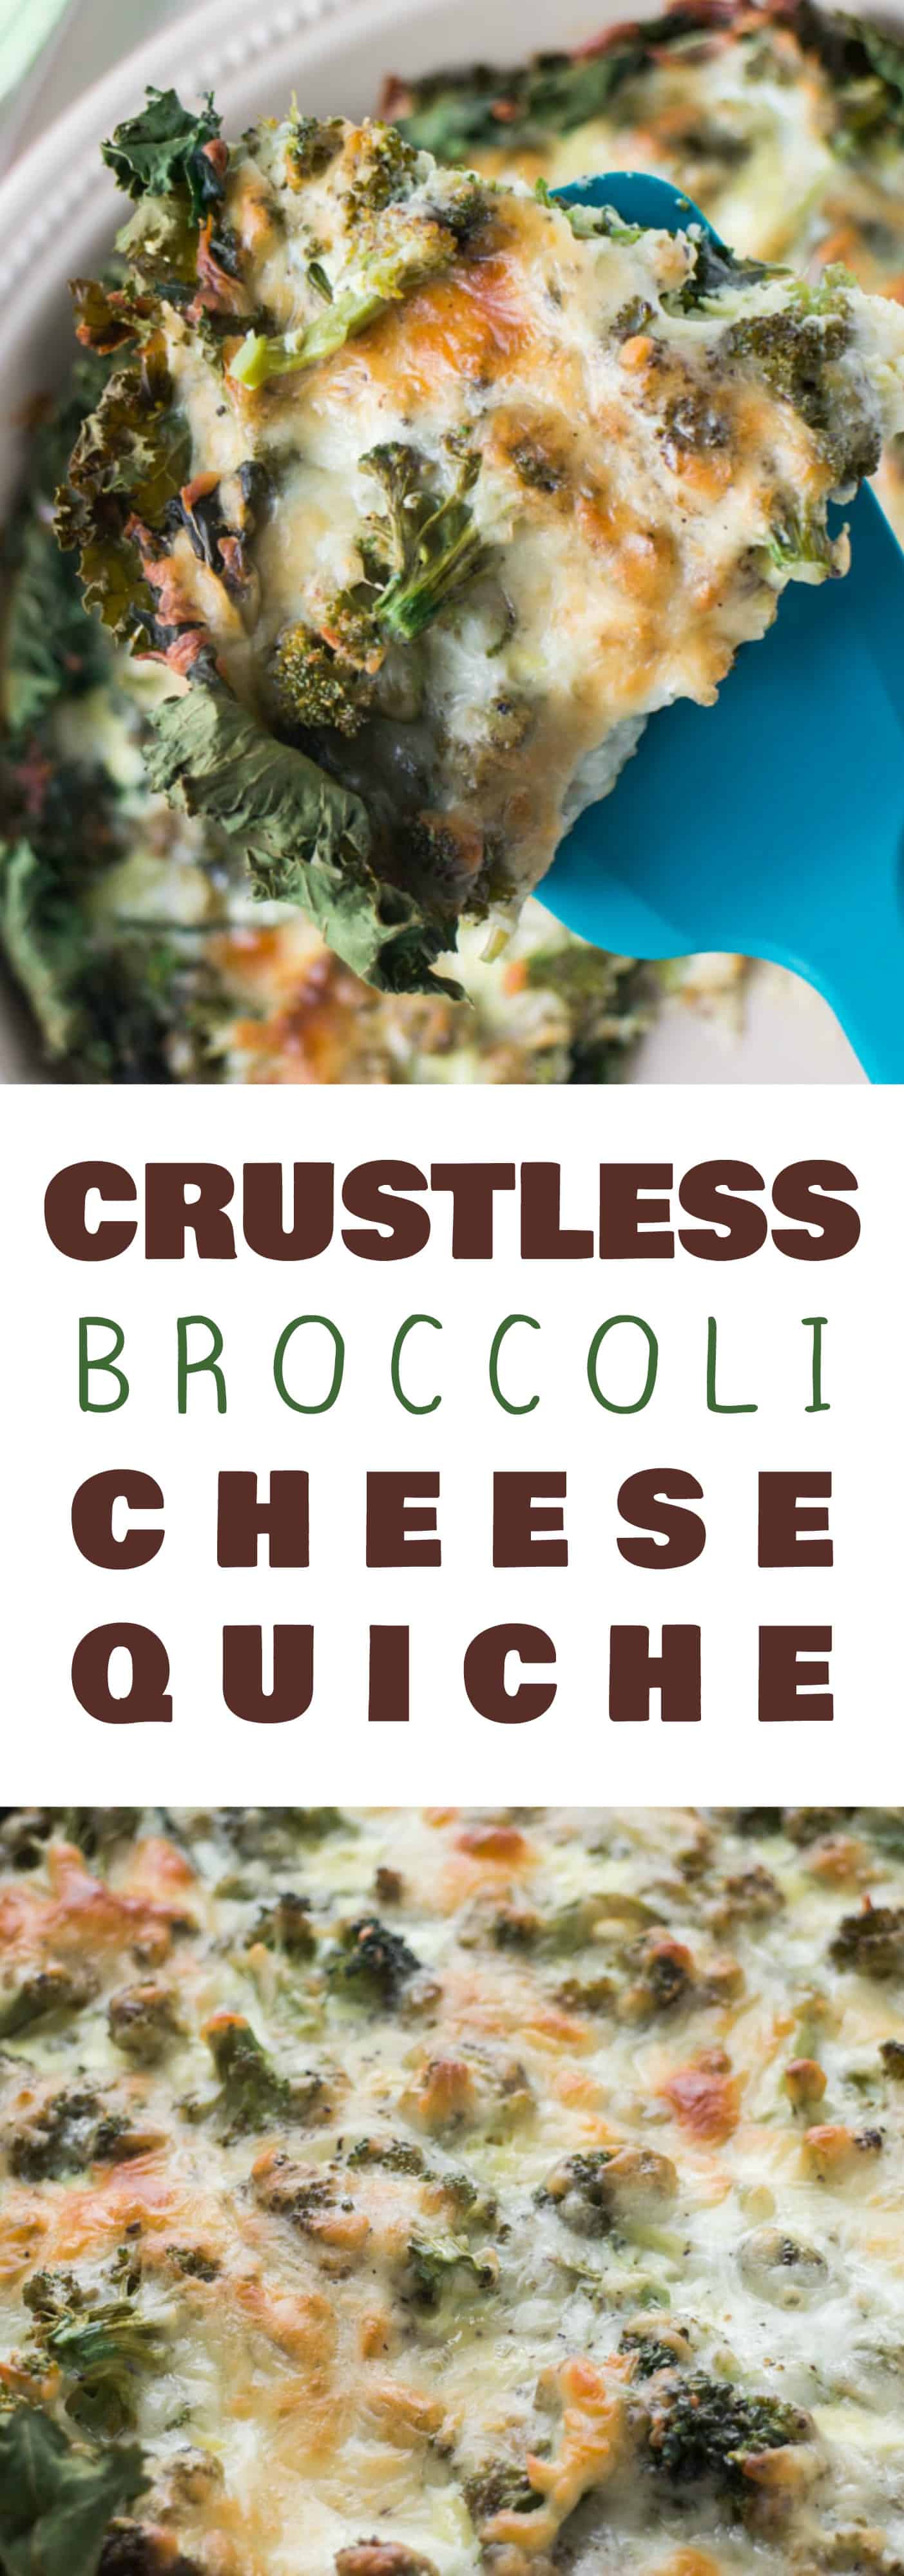 Crustless Broccoli Cheese Quiche is a easy dinner recipe your family is going to love. Instead of the traditional pie crust, you use kale to line the bottom of the casserole dish. Sprinkled mozzarella cheese on top makes it extremely cheesy! It's the perfect way to sneak in veggies!